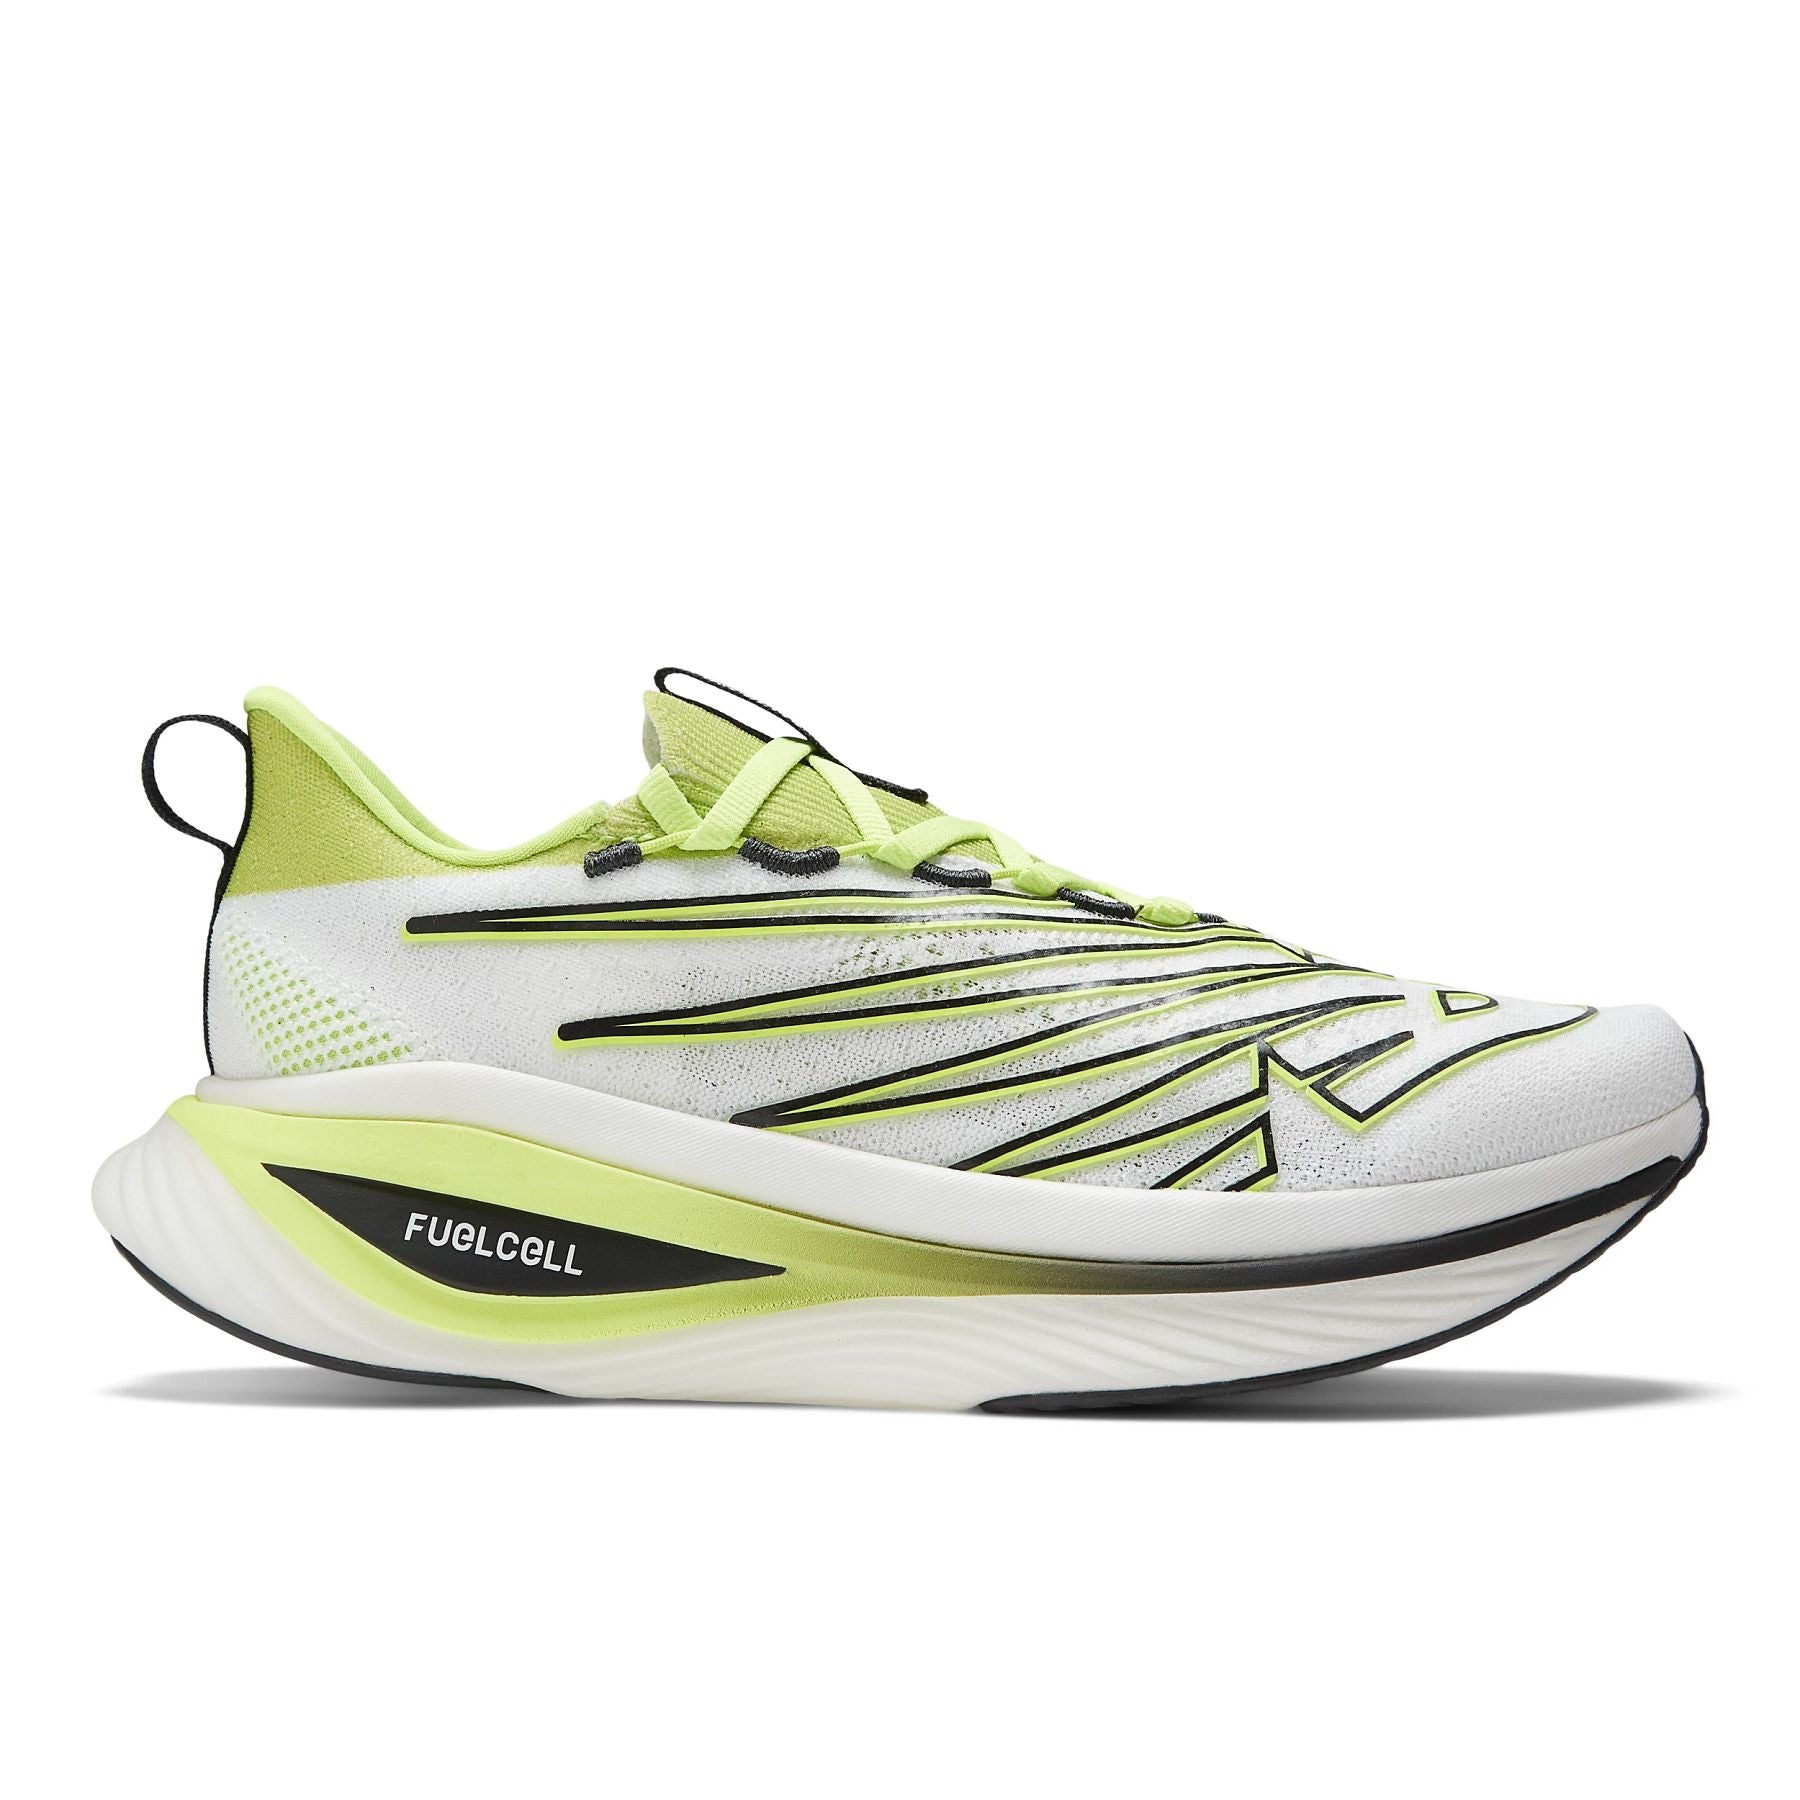 Lateral view of the Men's Super Comp Elite V3 in Thirty Watt/Black/Cosmic Rose